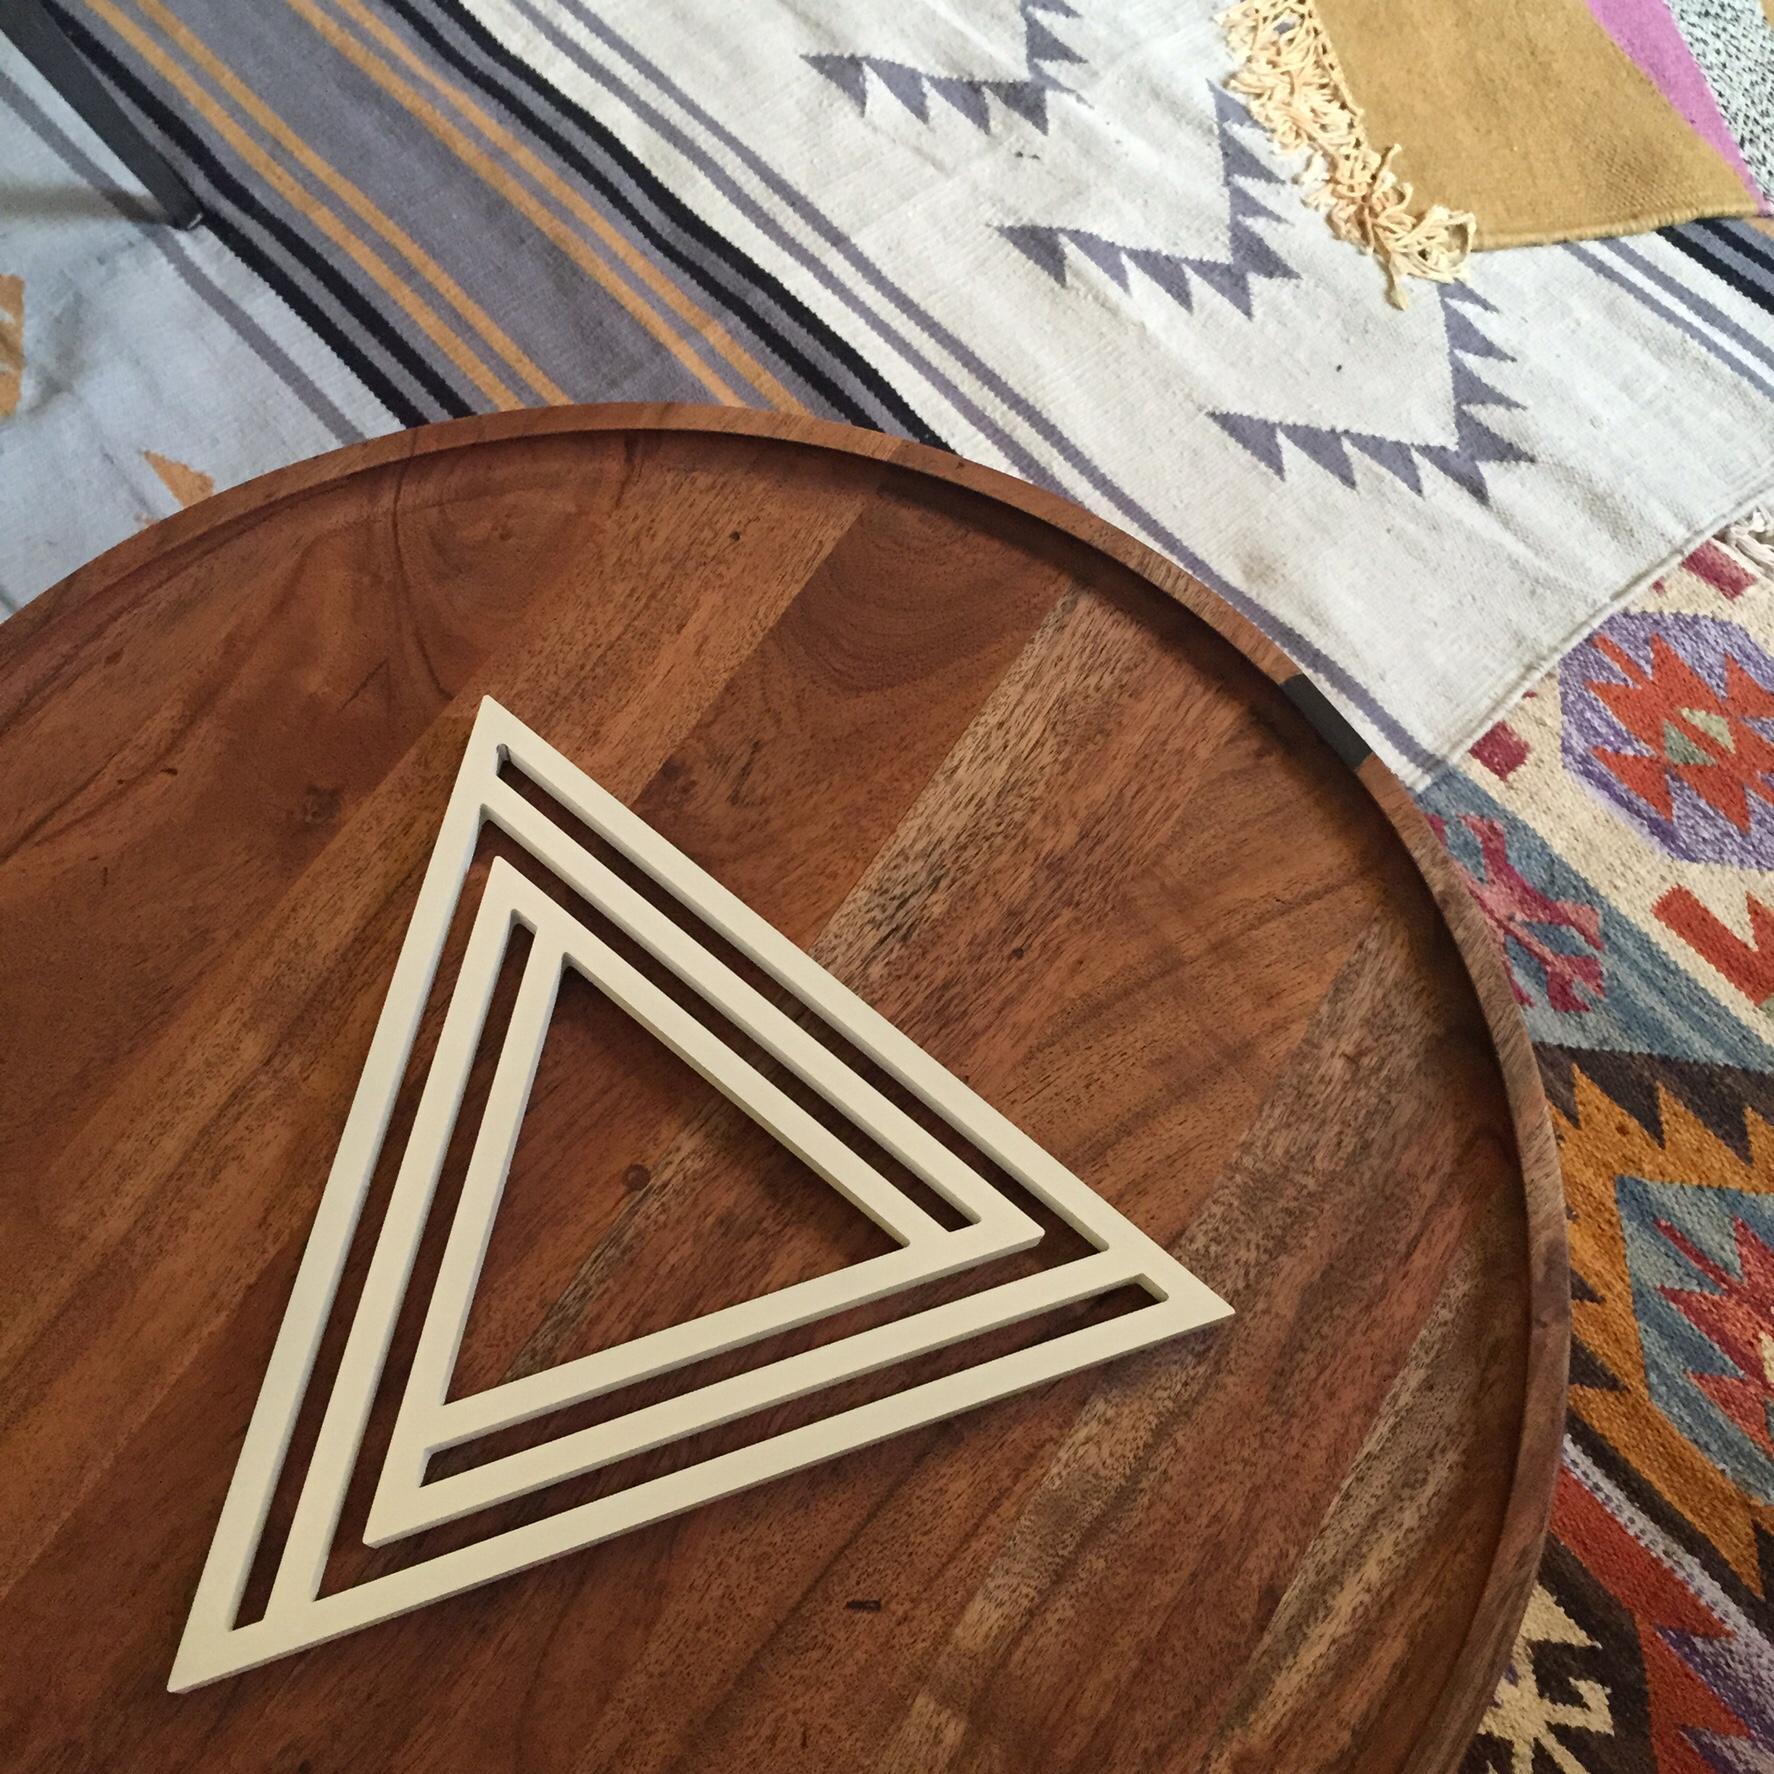 The Triangle Trivet was Base Modern's first design, and the inspiration for the forming of this company. Its form was inspired by the 